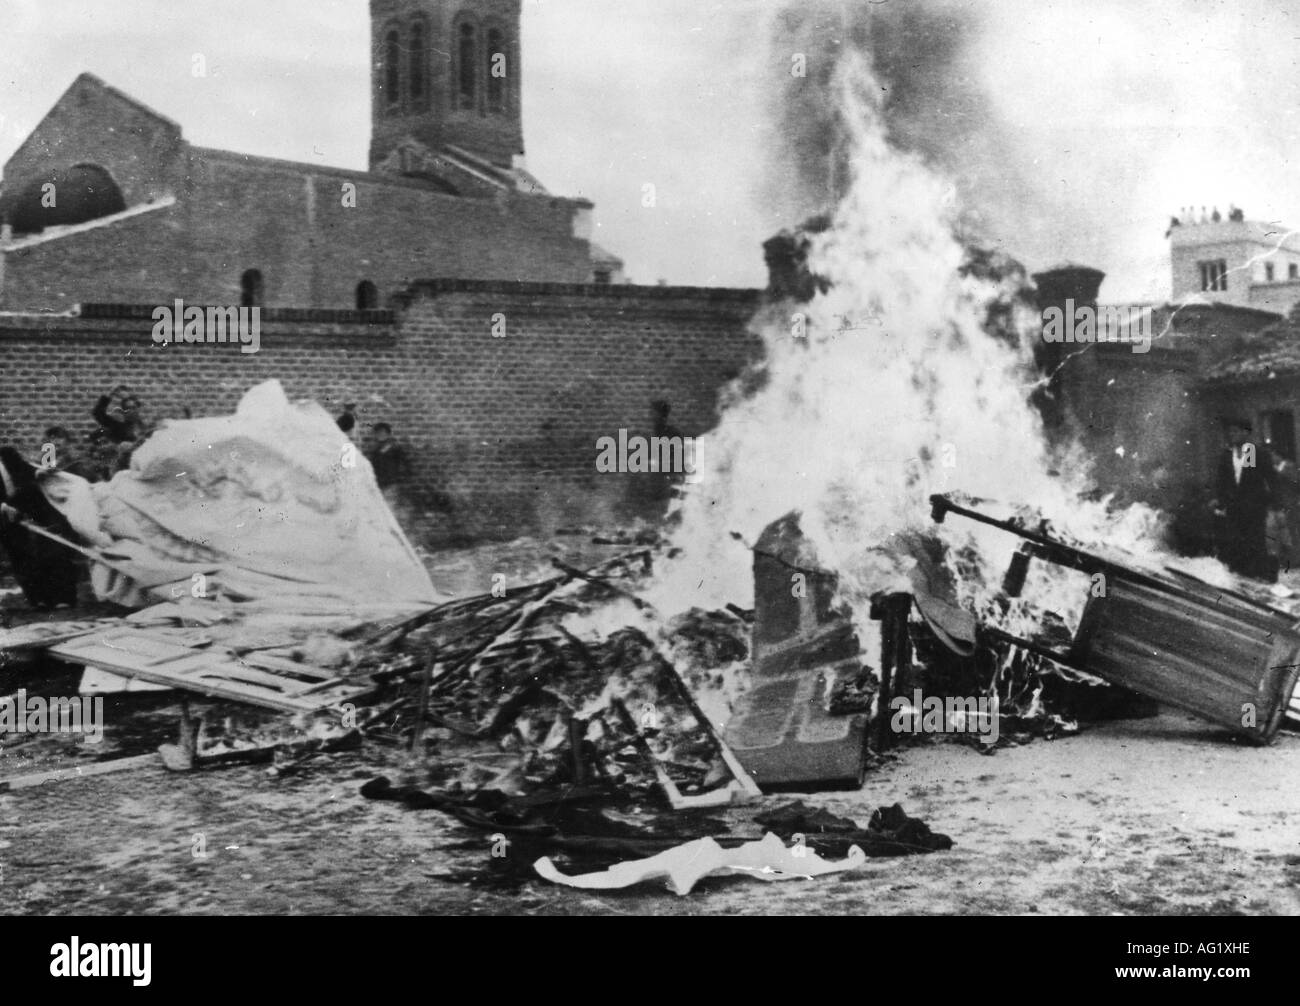 geography / travel, Spain, Spanish Civil War 1936 - 1939, Madrid, 1936, anarchists burning furniture of the catholic school Los Angeles, 20th century, historic, historical, 1930s, demolition, destruction, destroying, fire, anarchy, religion, people, Stock Photo